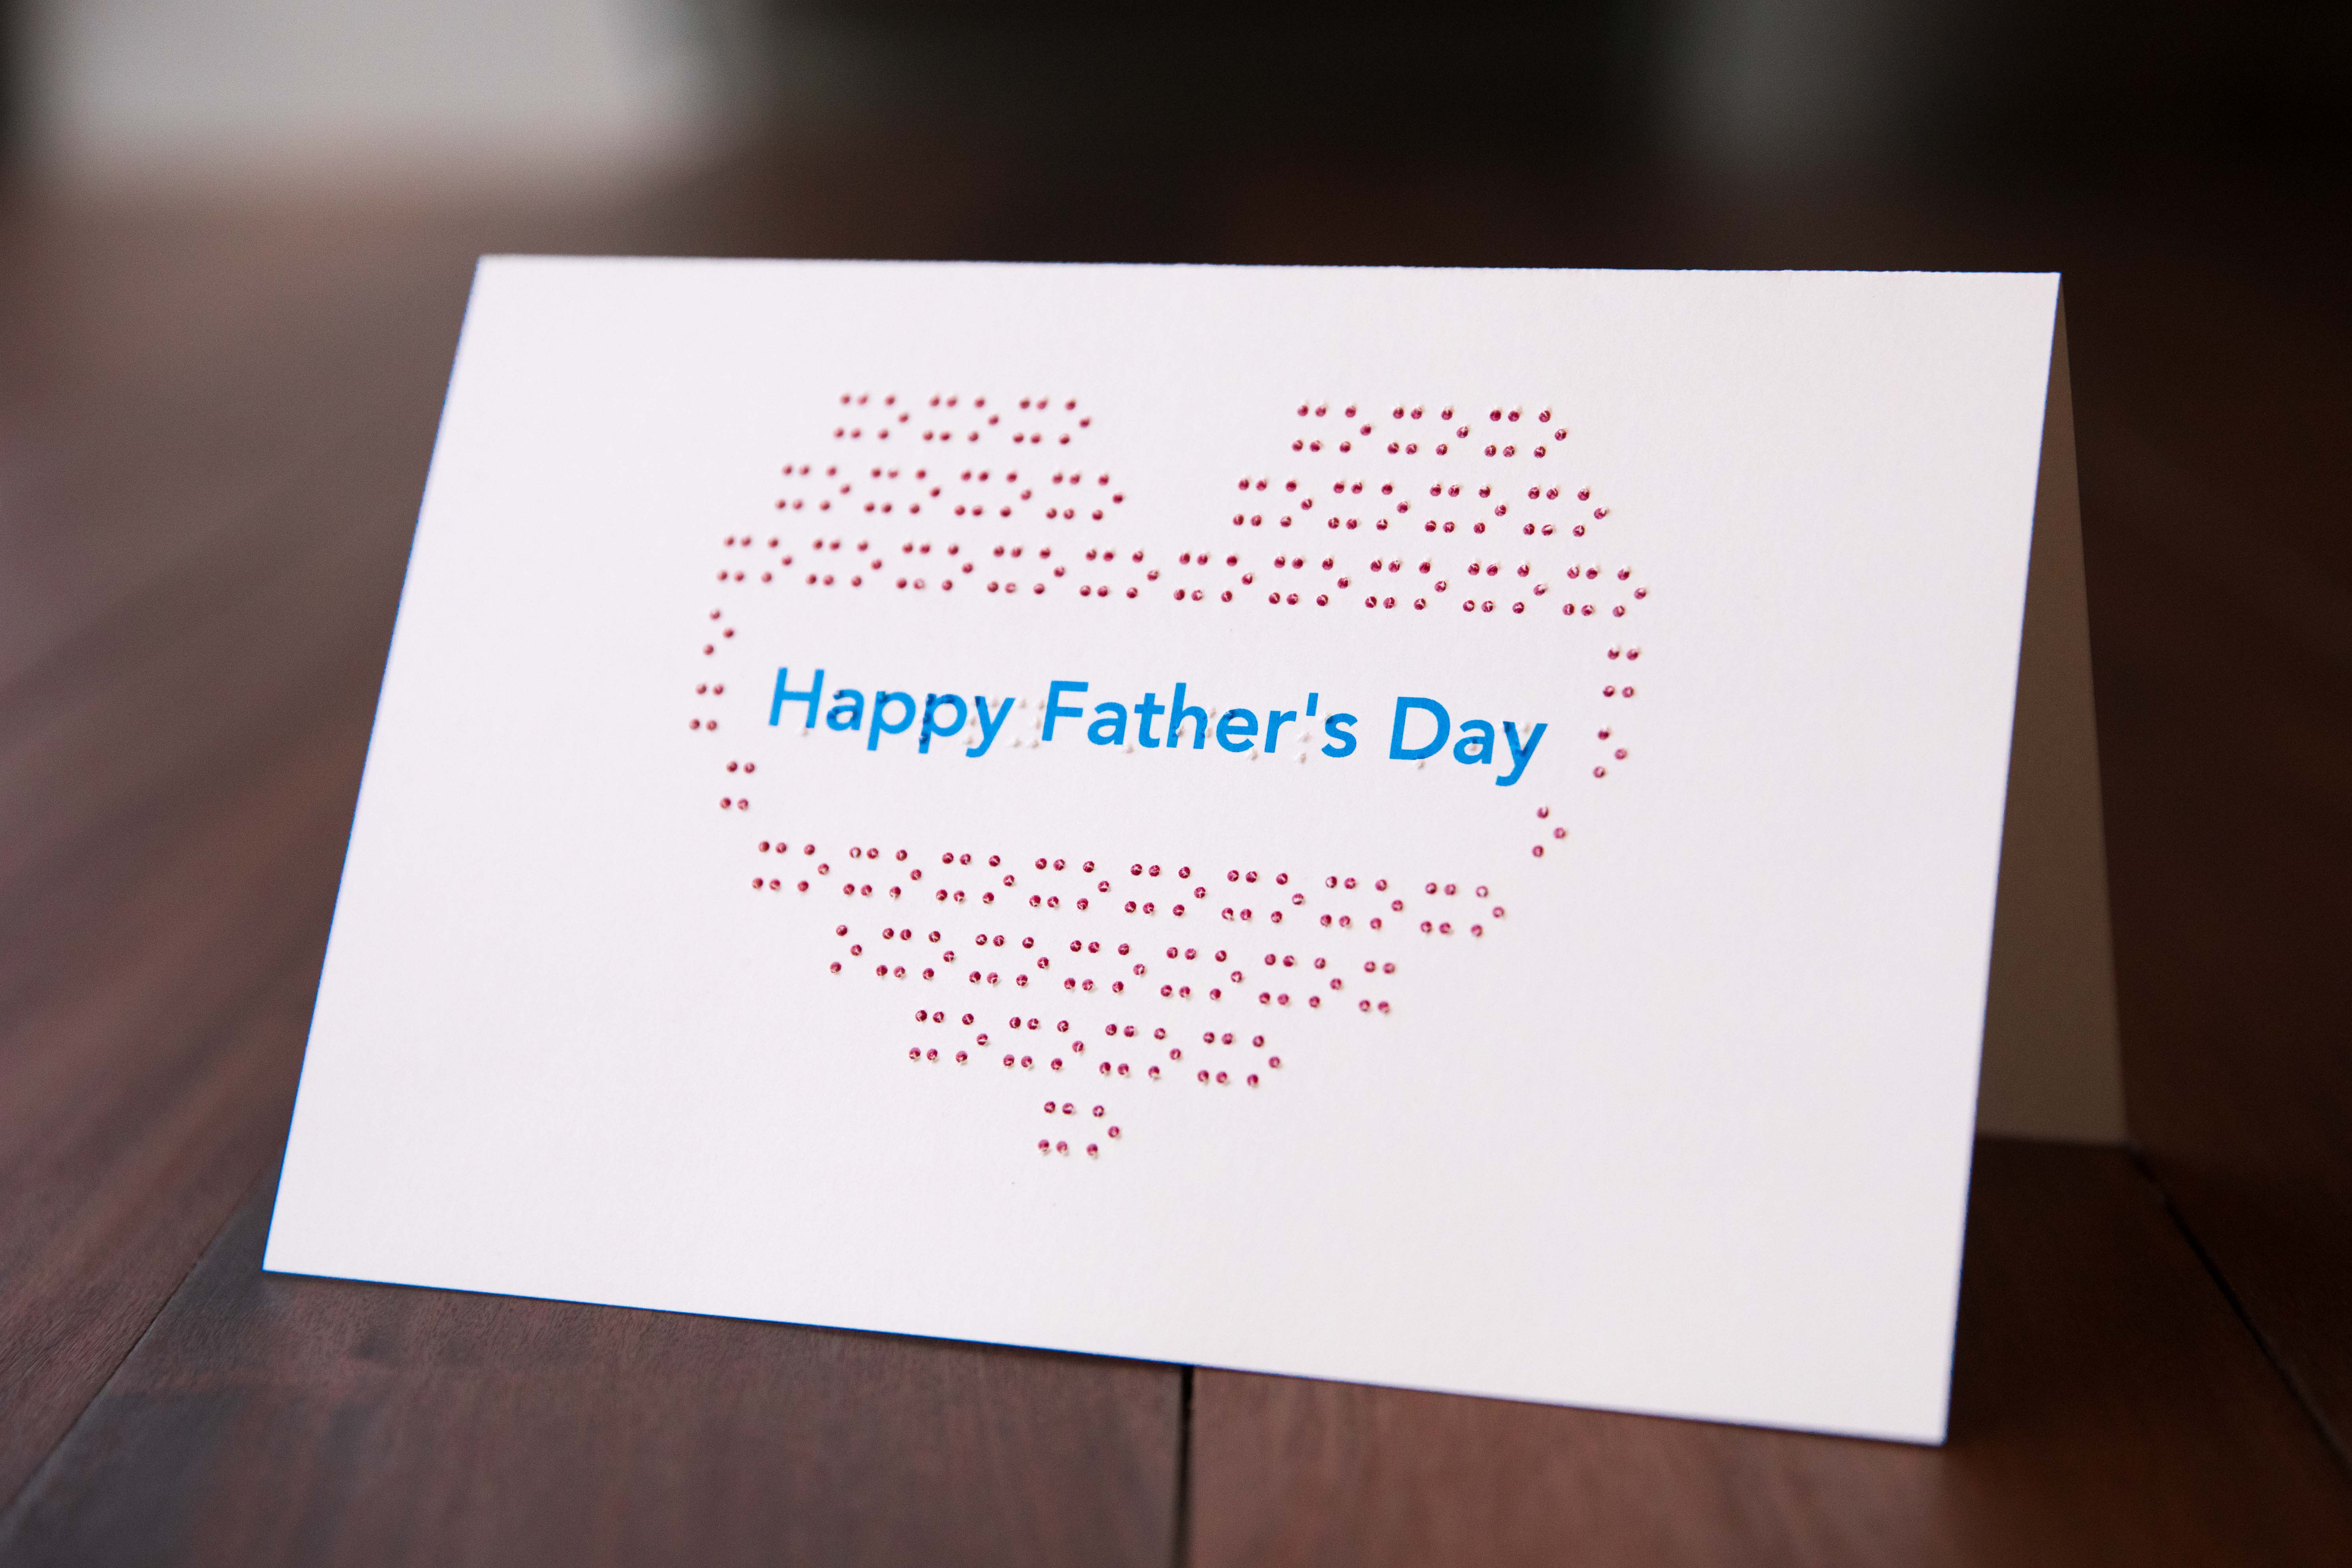 The words 'Happy Father’s Day’ in blue text and braille, in the middle of a red ink and tactile heart, made up of braille x’s and o’s.